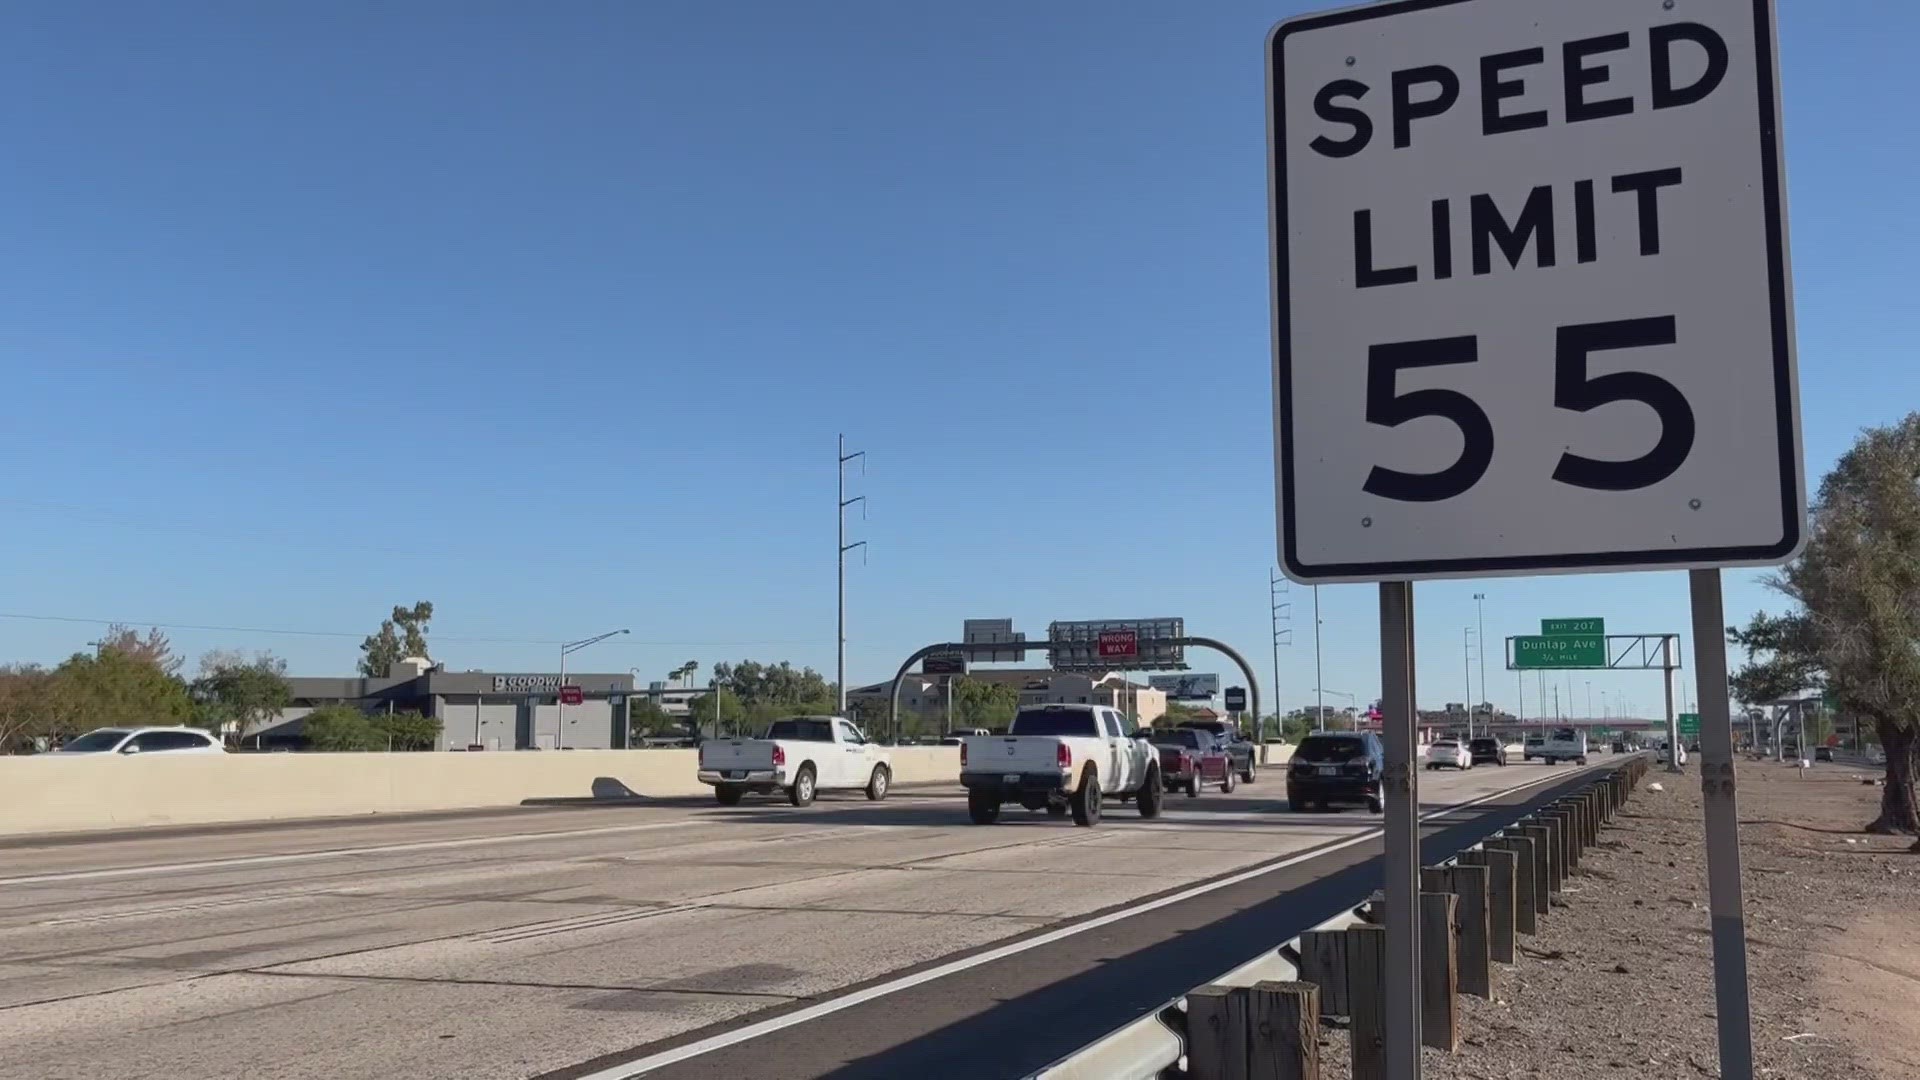 A new law could raise the speed limit by at least 10 miles per hour along the interstate.